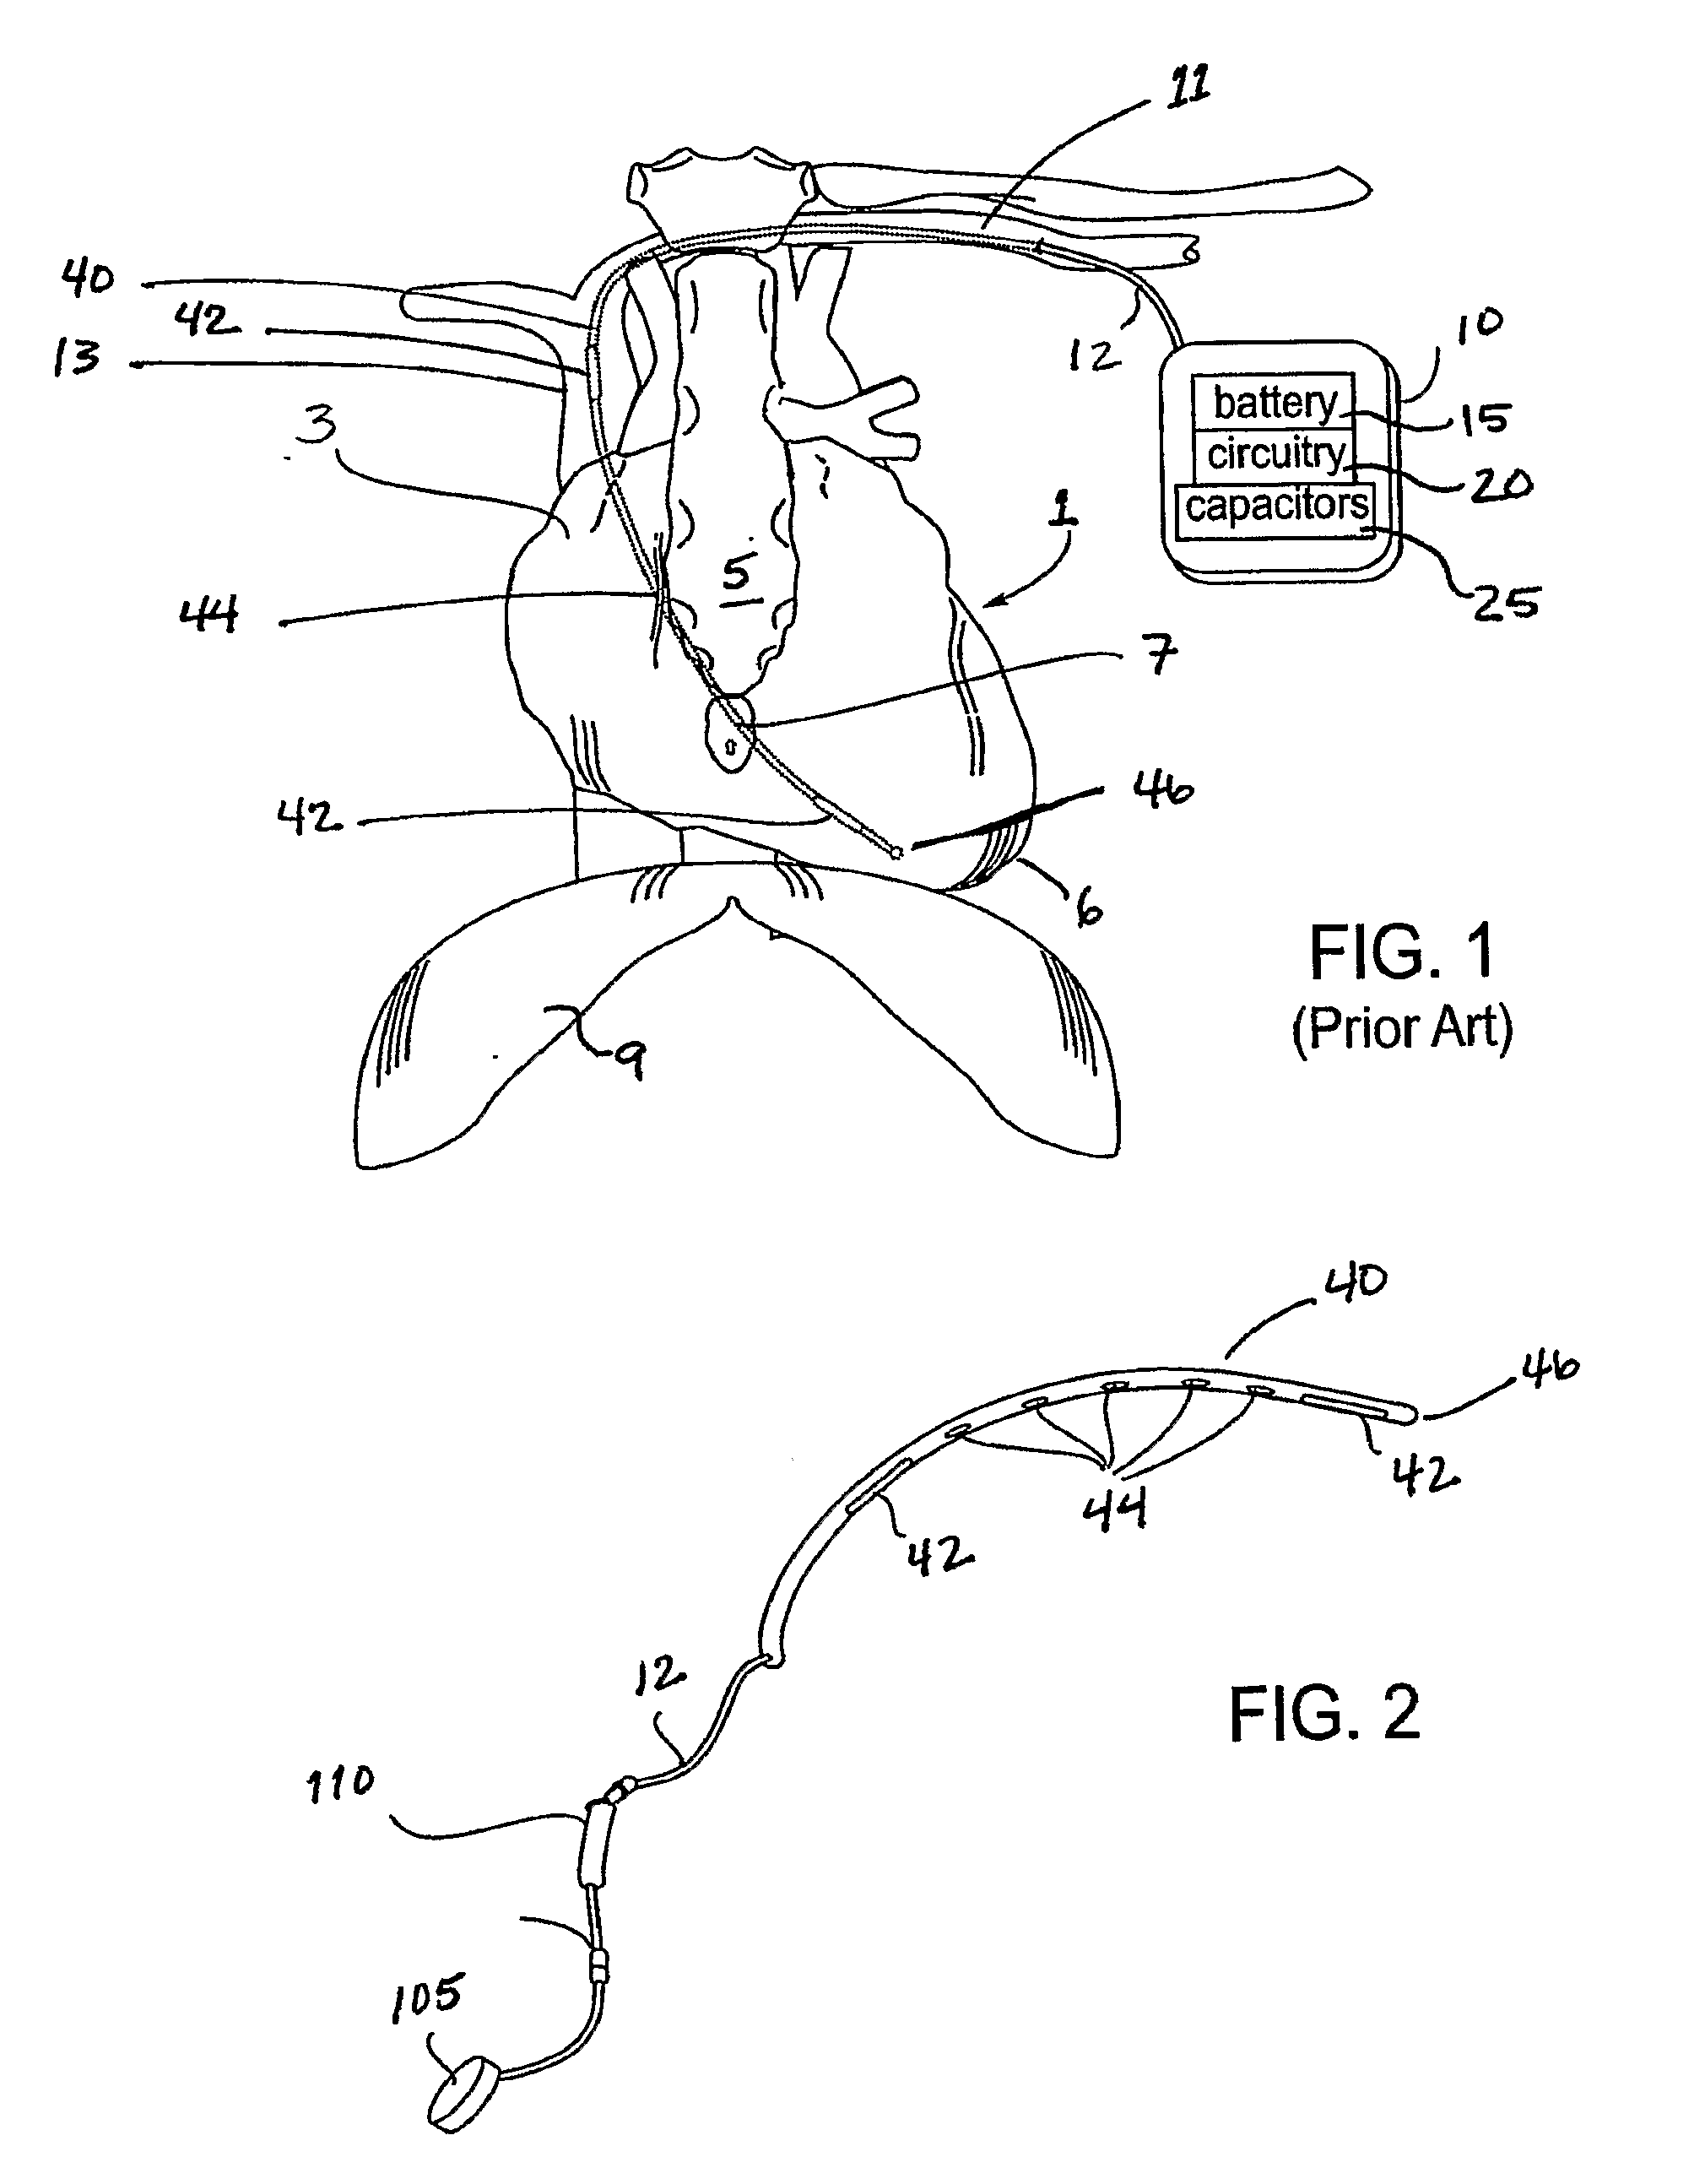 Implanted cardiac device for defibrillation